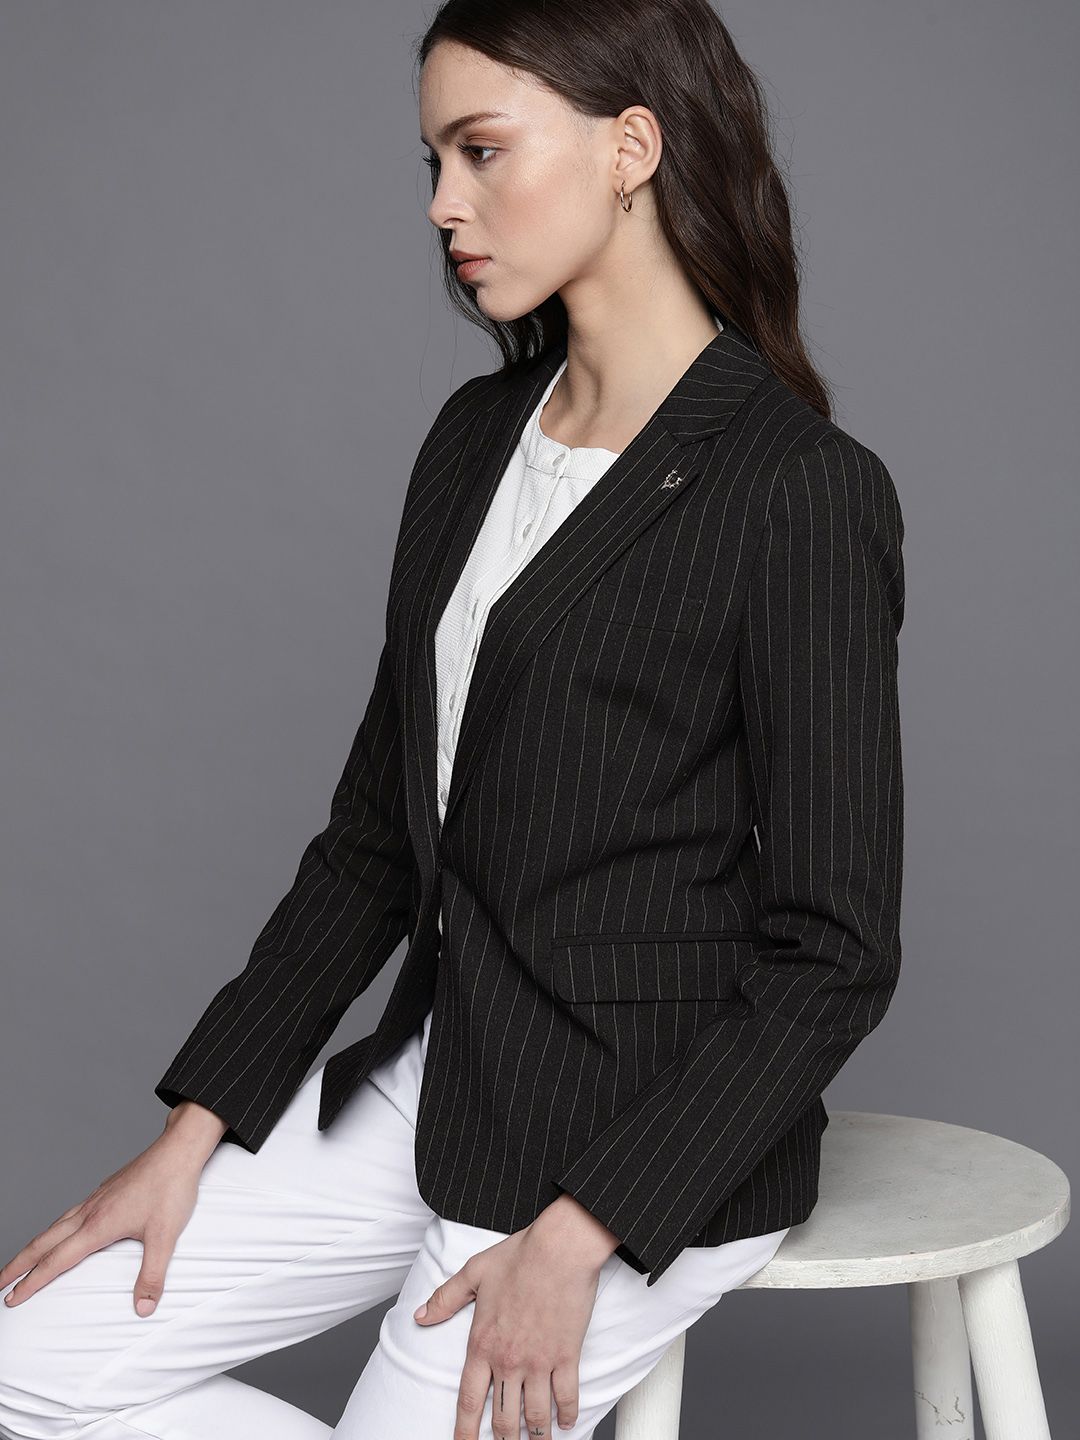 Allen Solly Woman Black & White Striped Single-Breasted Formal Blazers Price in India